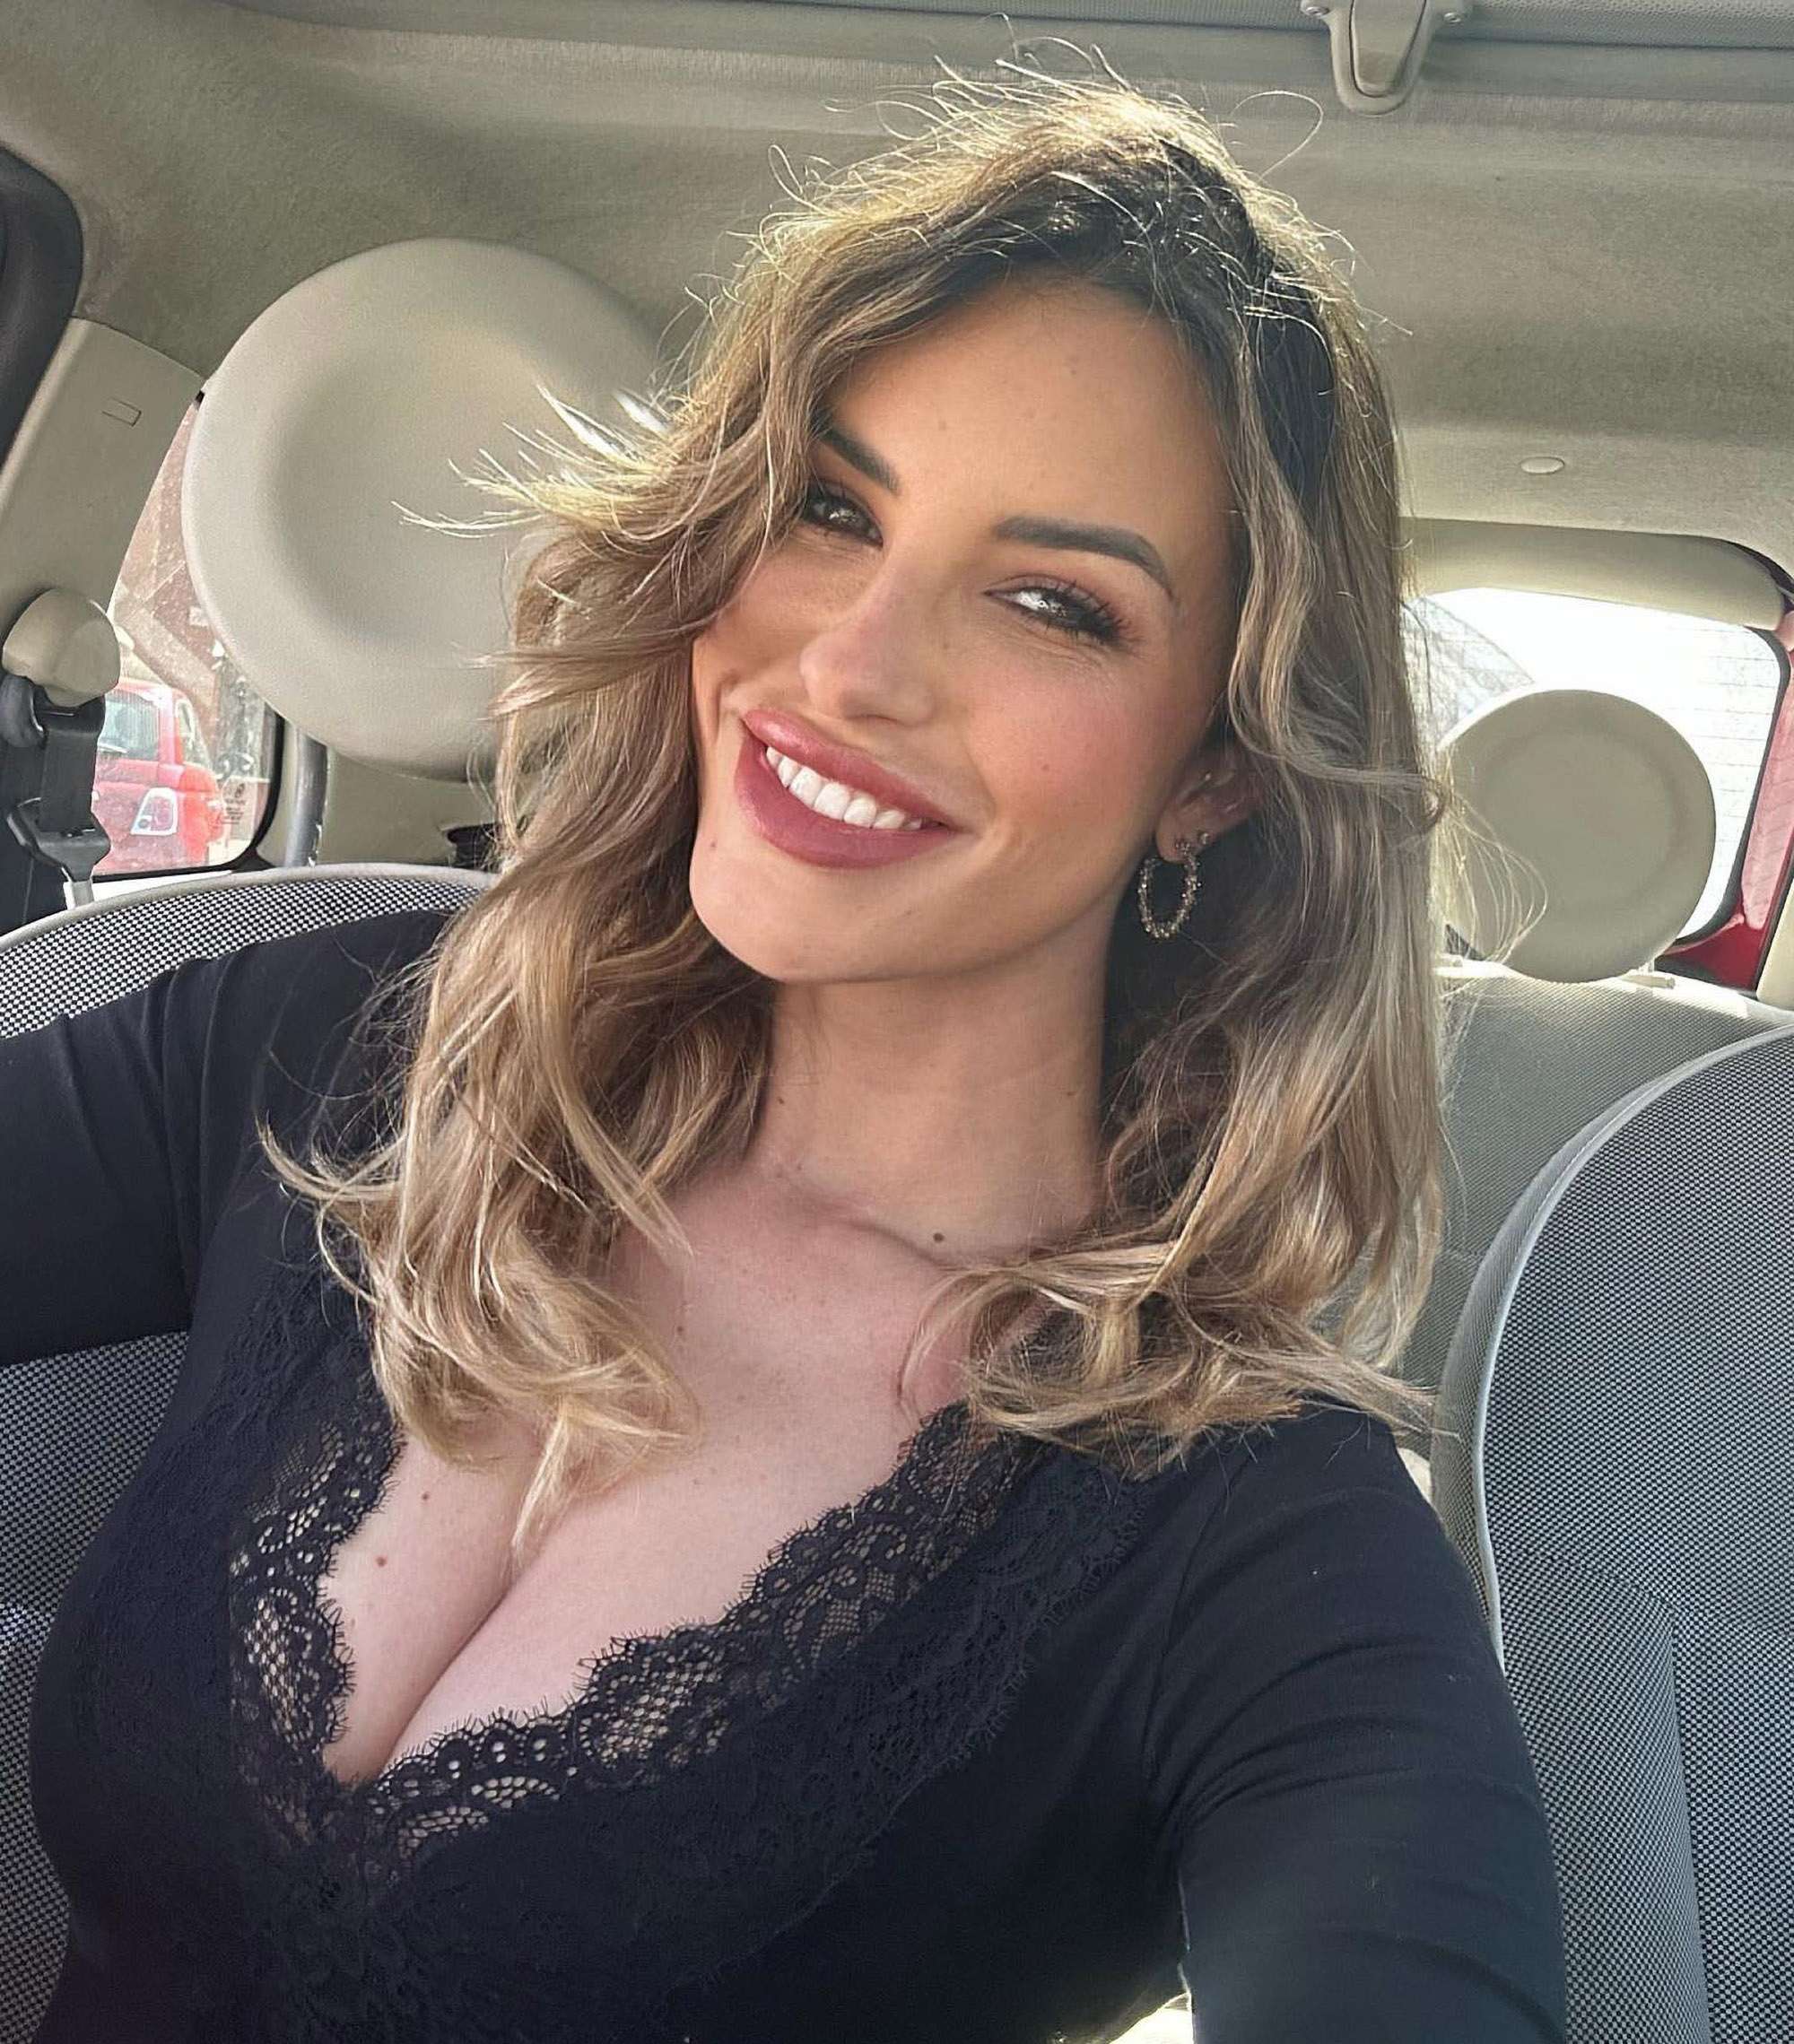 Read more about the article Influencer Who Feared Death After Car Crash Shares Pics Of Injuries